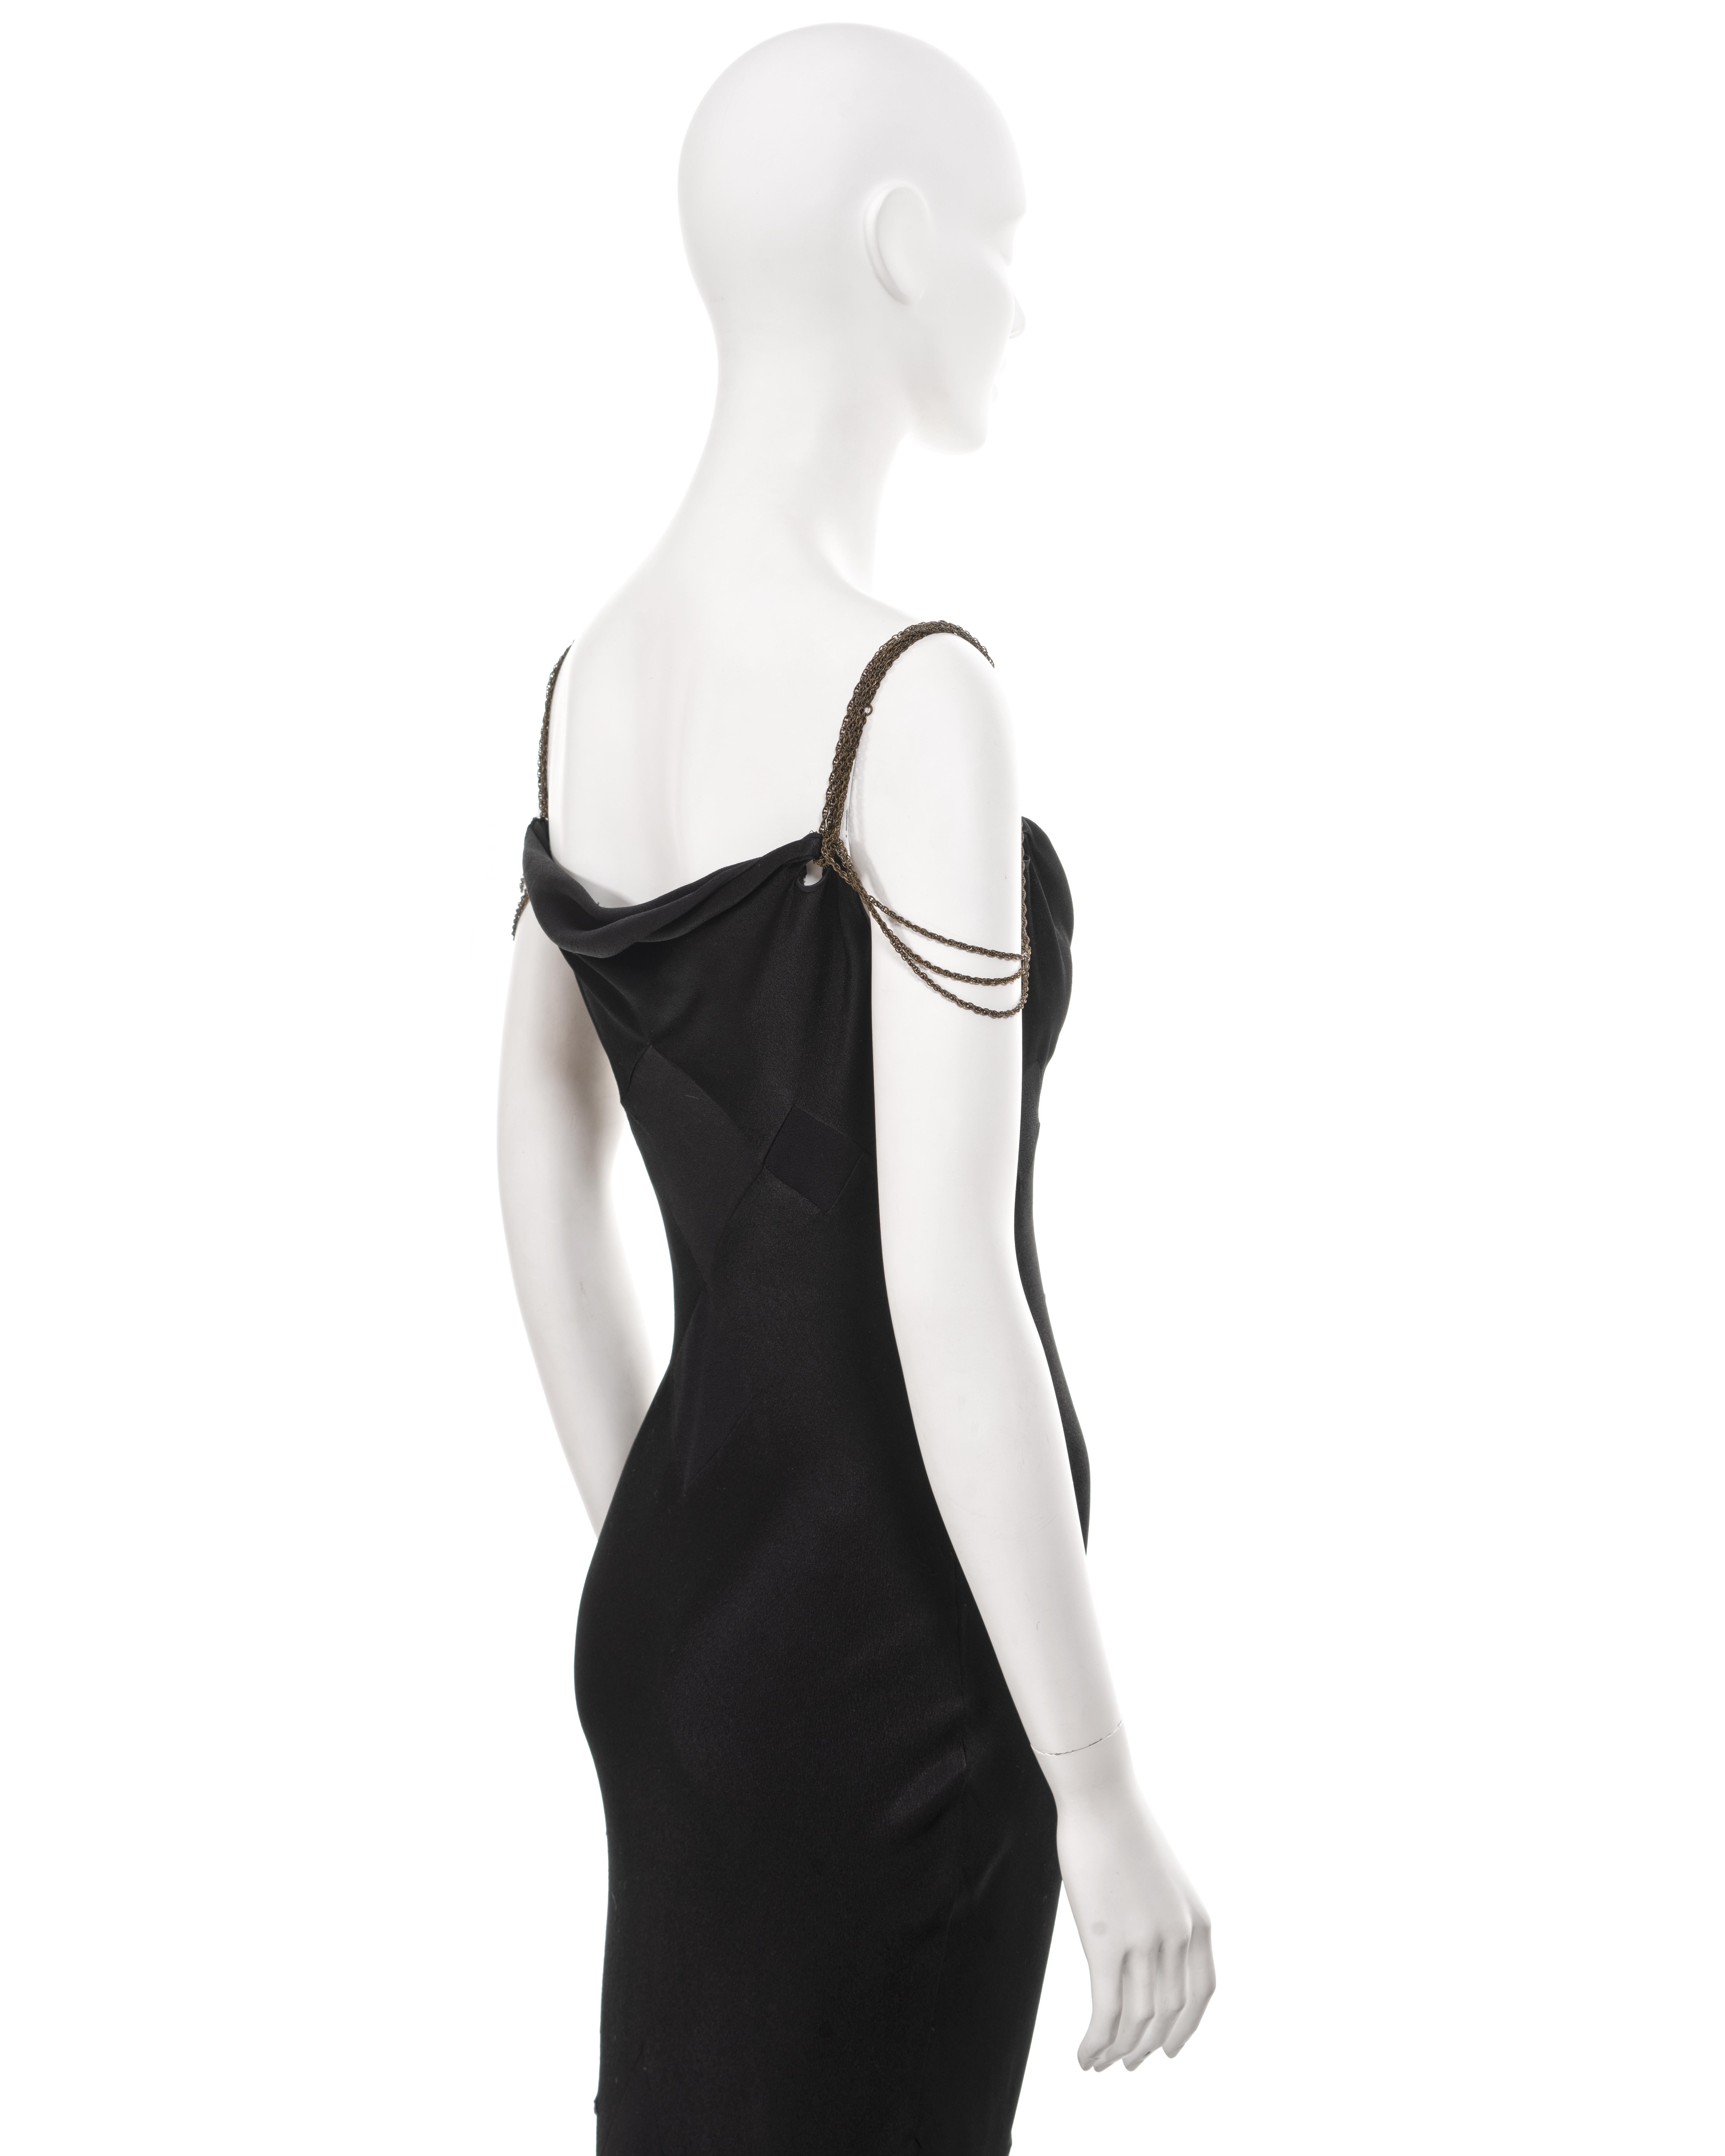 John Galliano black bias-cut satin evening dress with chain straps, ss 2002 For Sale 5